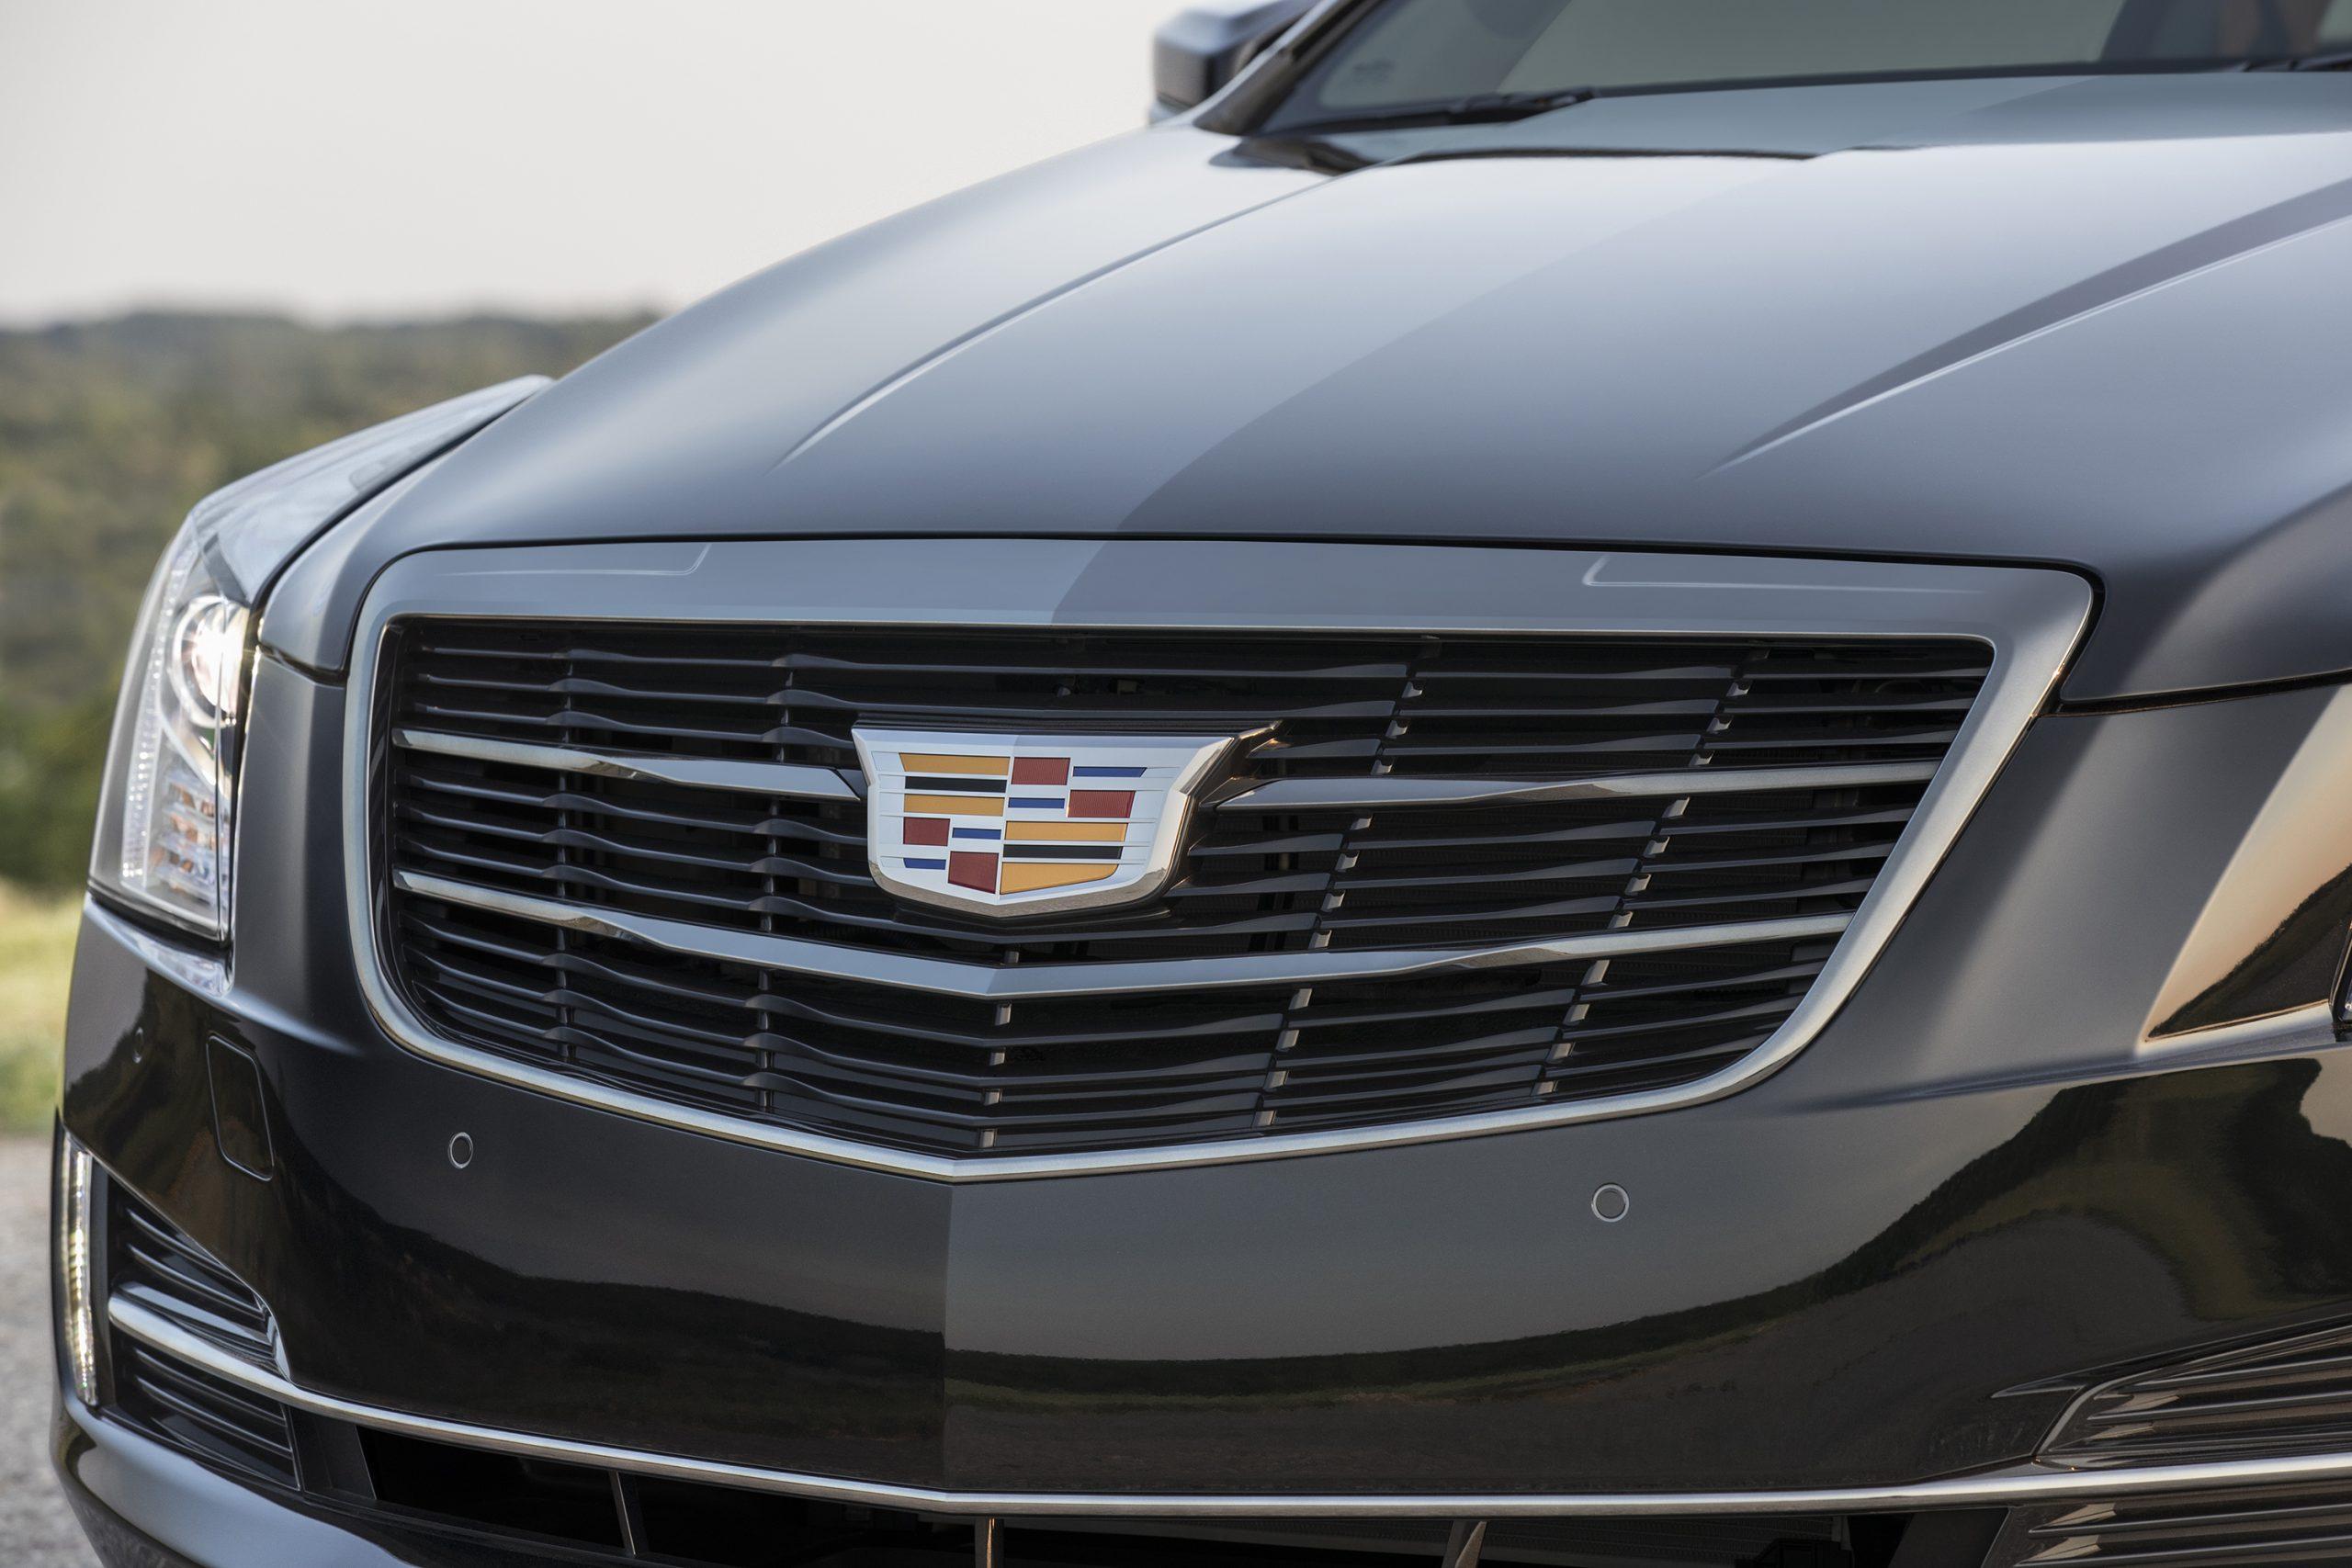 Cadillac wants to form an F1 team with Andretti